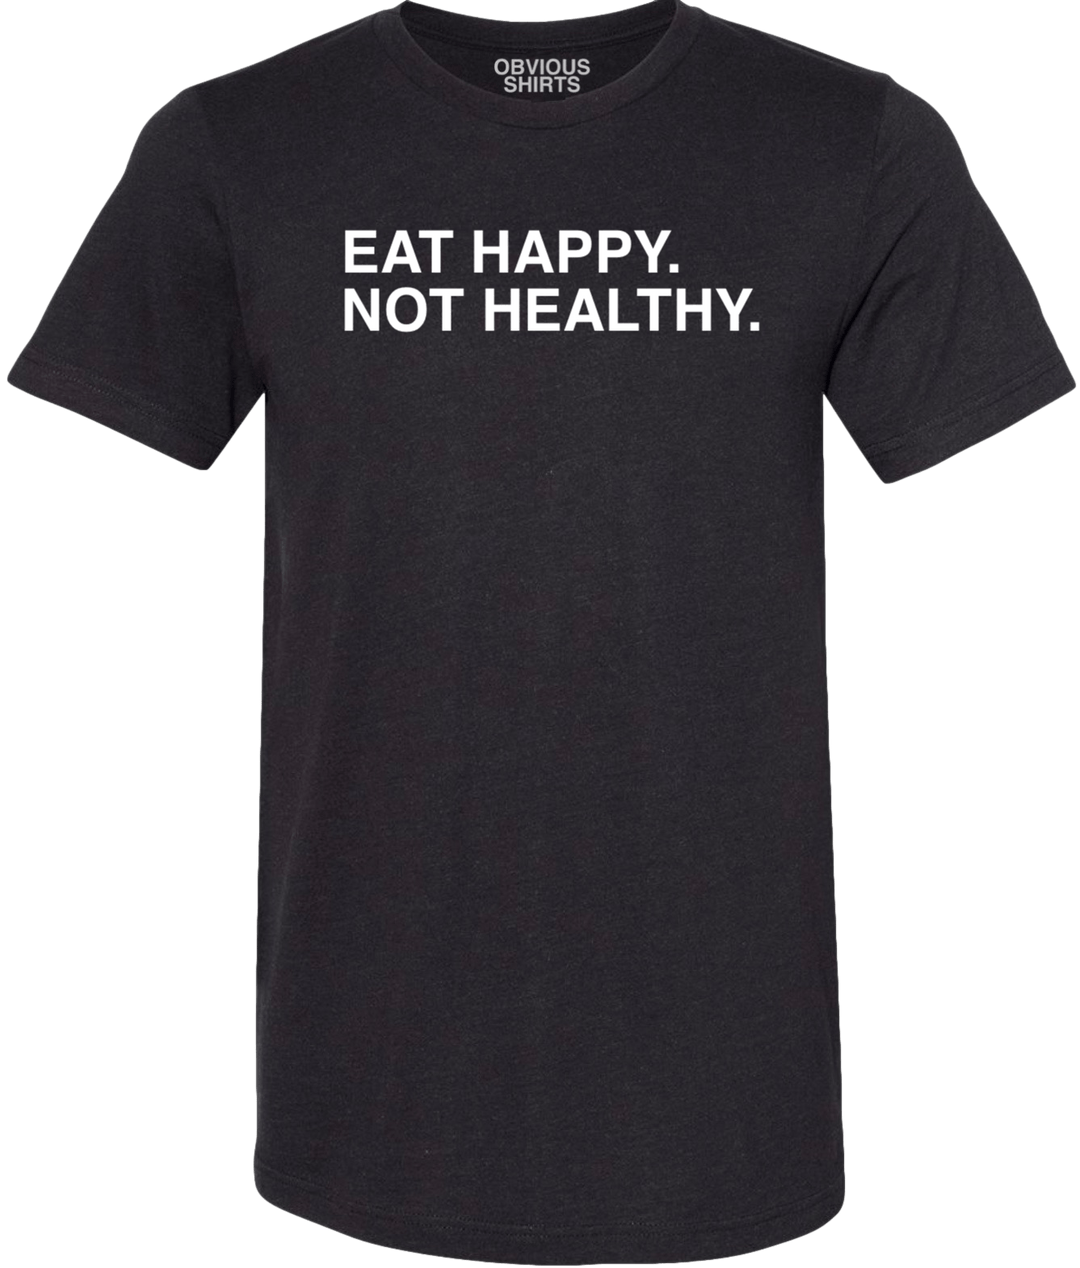 EAT HAPPY. NOT HEALTHY. - OBVIOUS SHIRTS